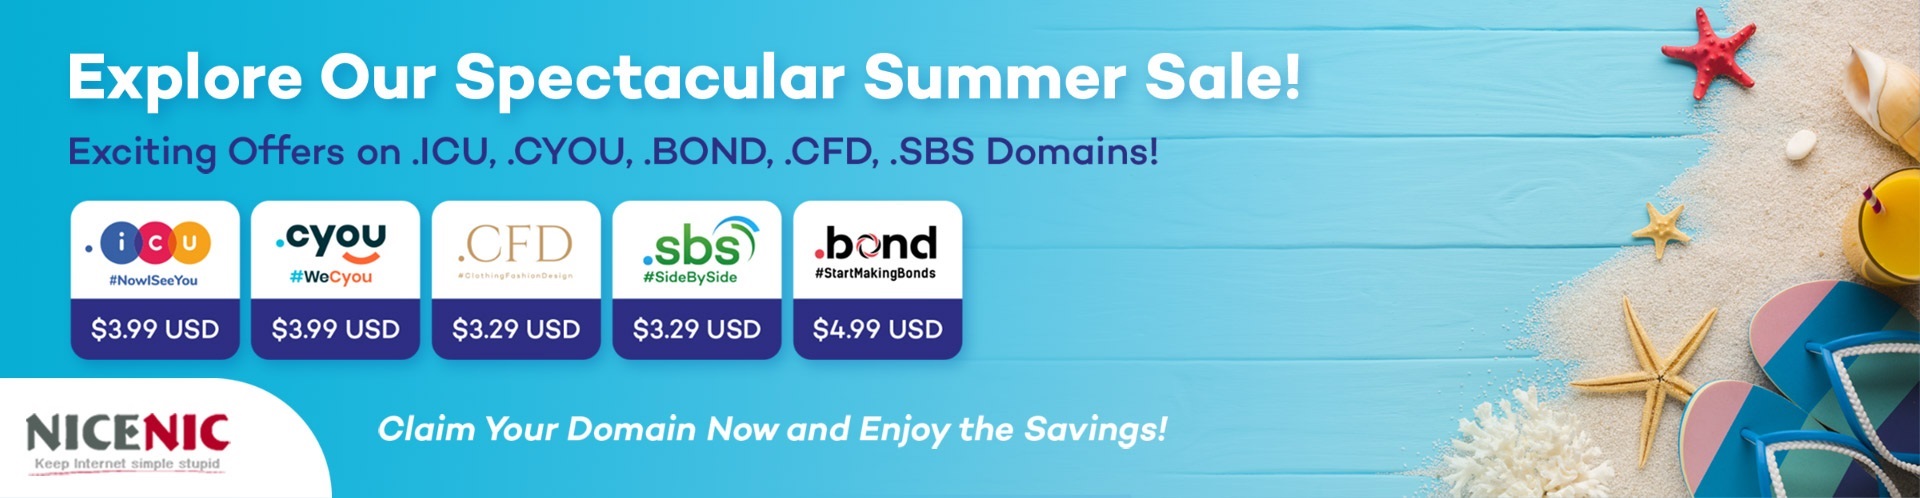 Promos and Deals - Save on Domains | NiceNIC.NET